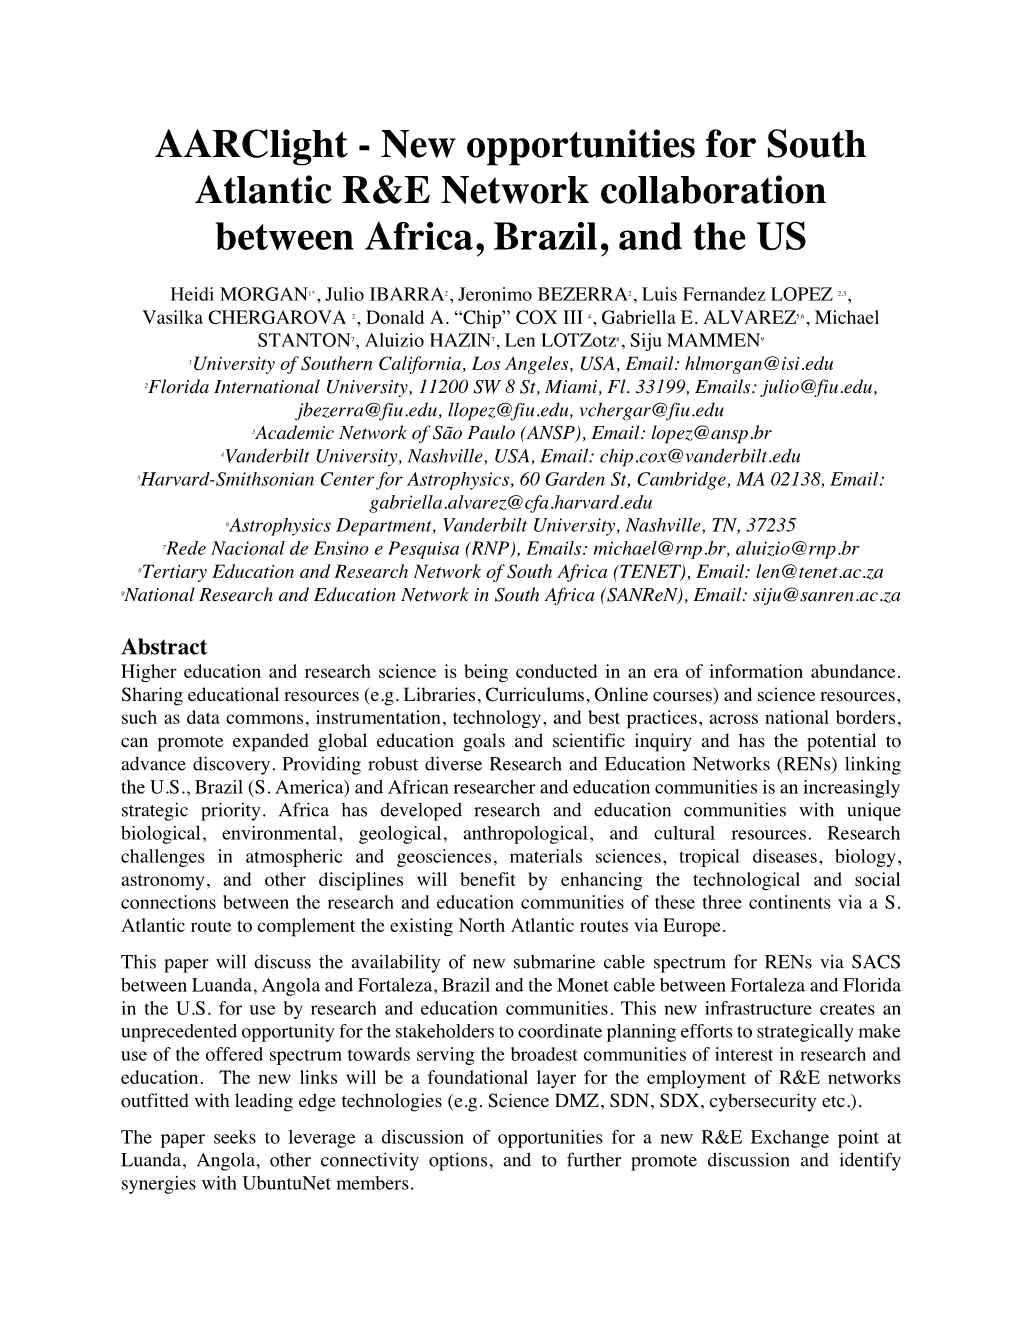 New Opportunities for South Atlantic R&E Network Collaboration